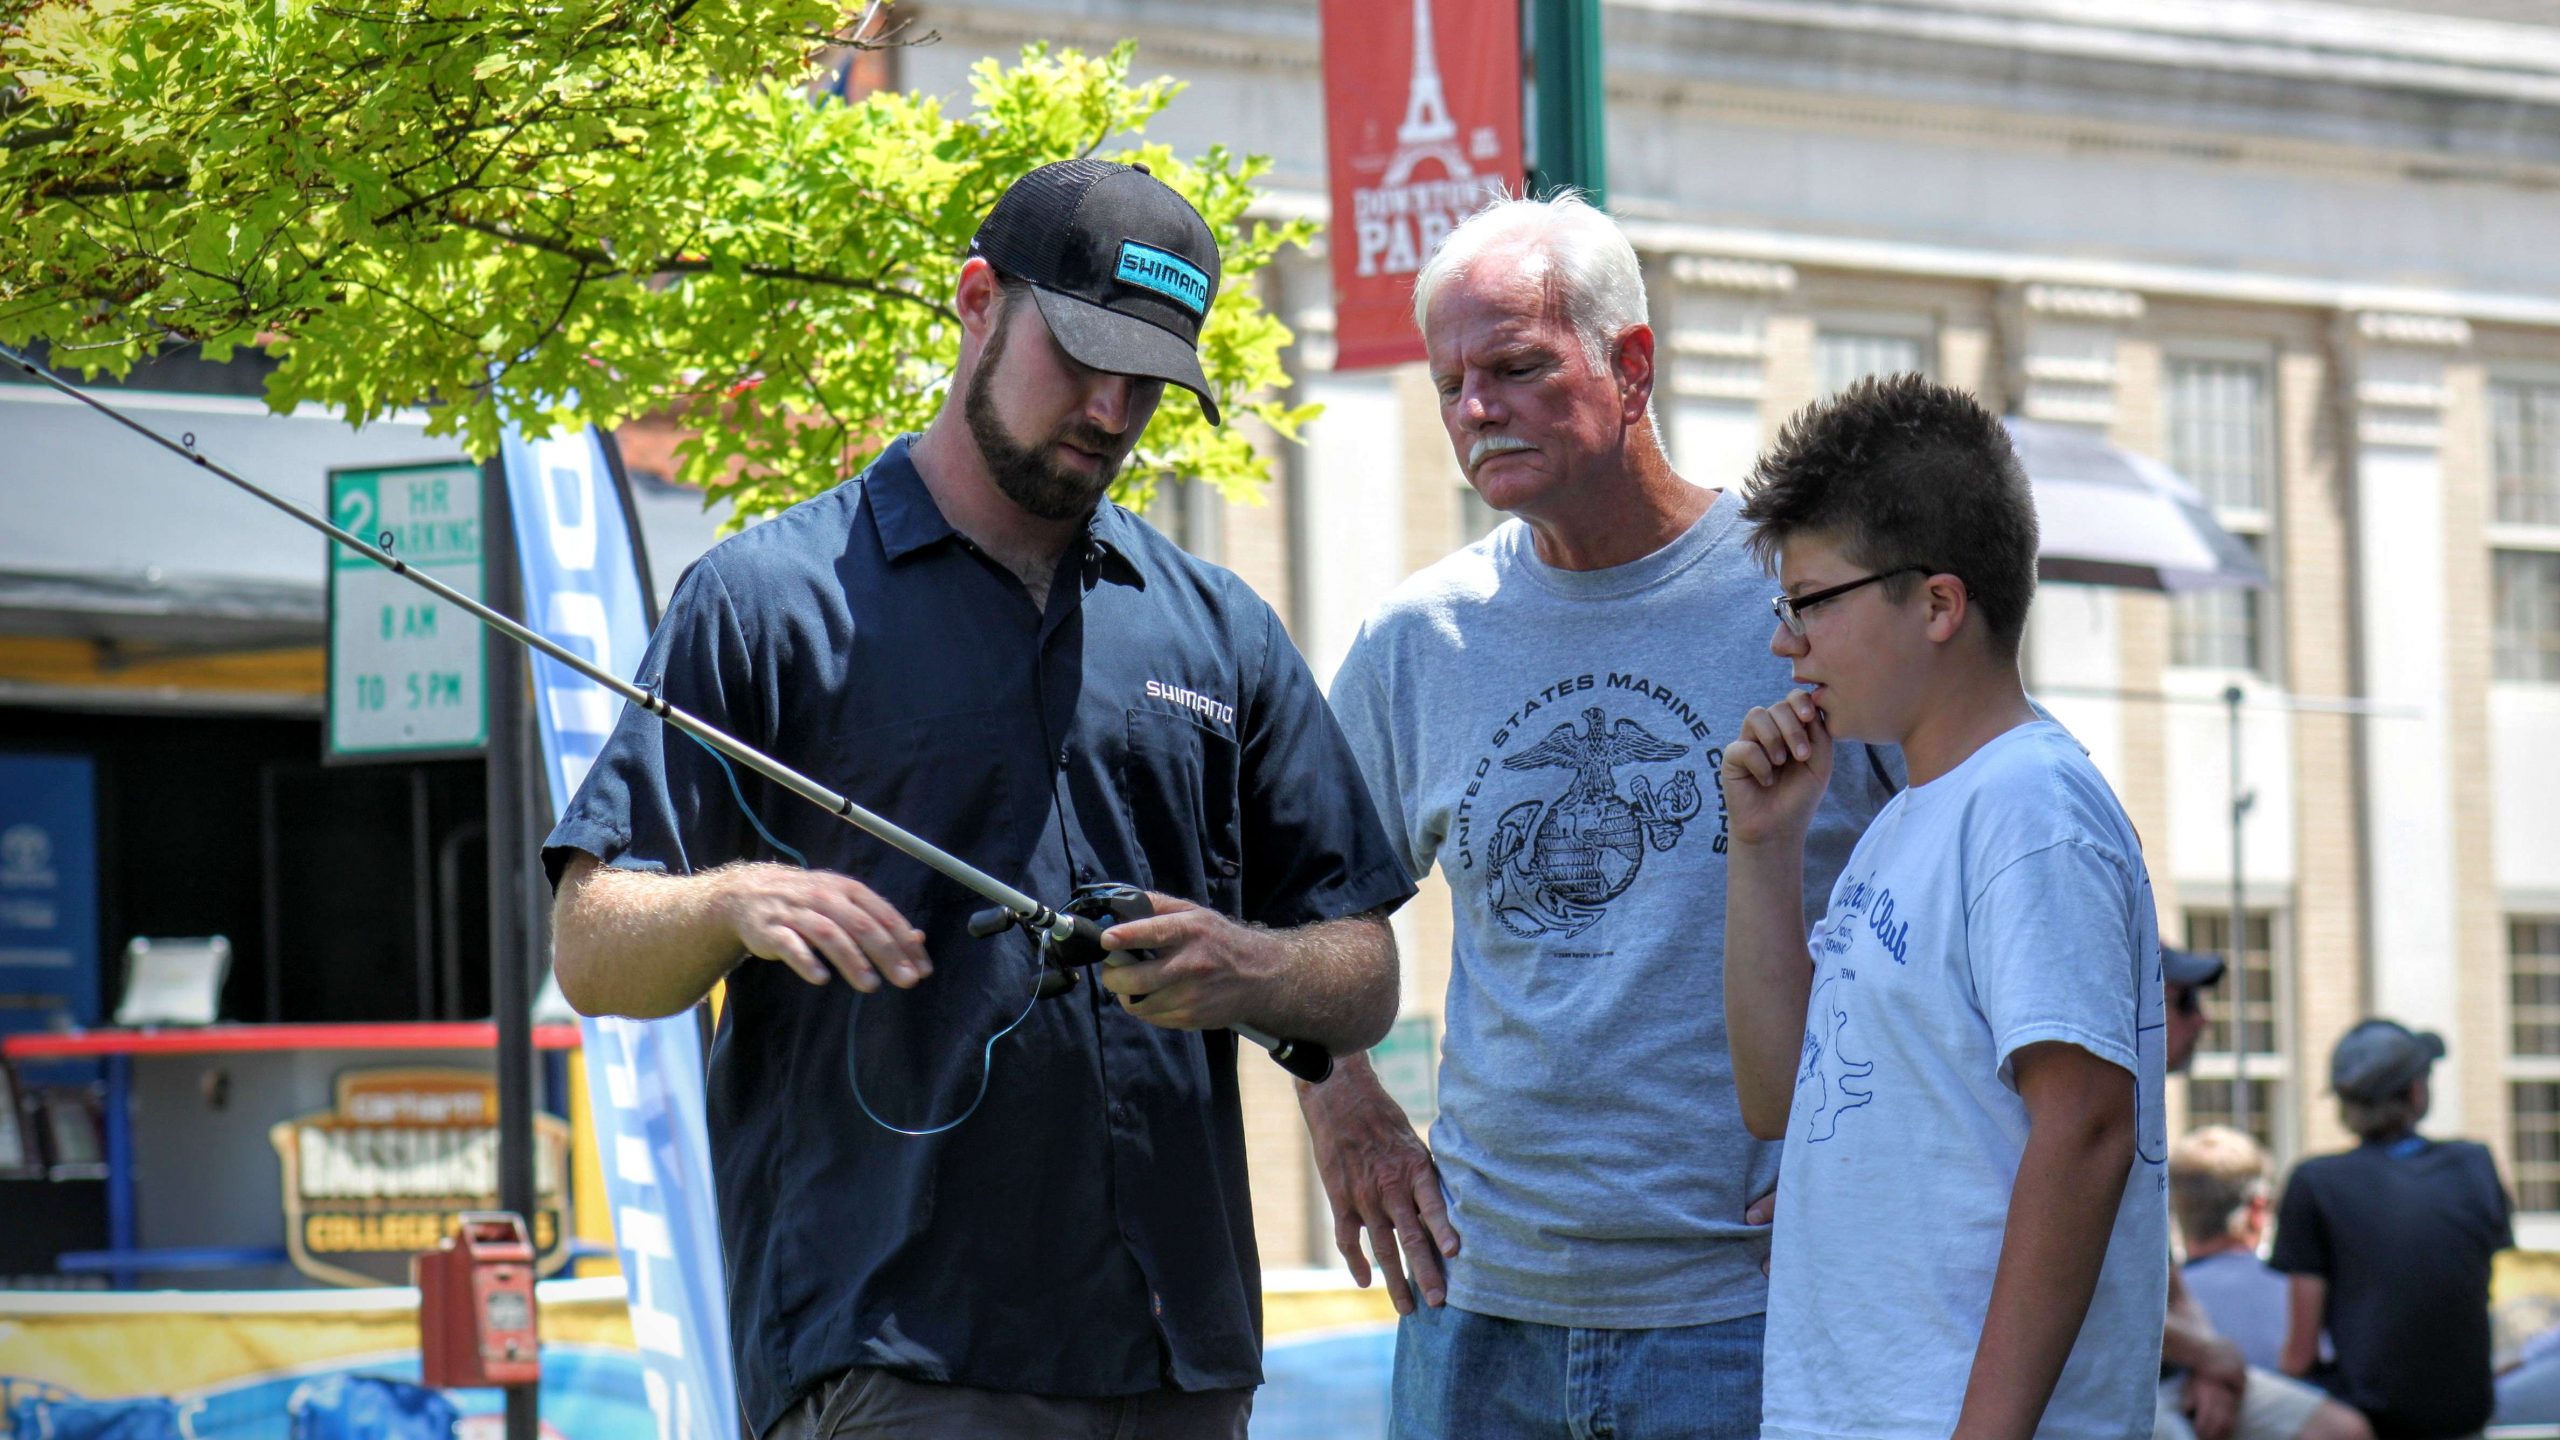 Shimano was there with rods for flipping, and experts were there to lend a helping hand.

